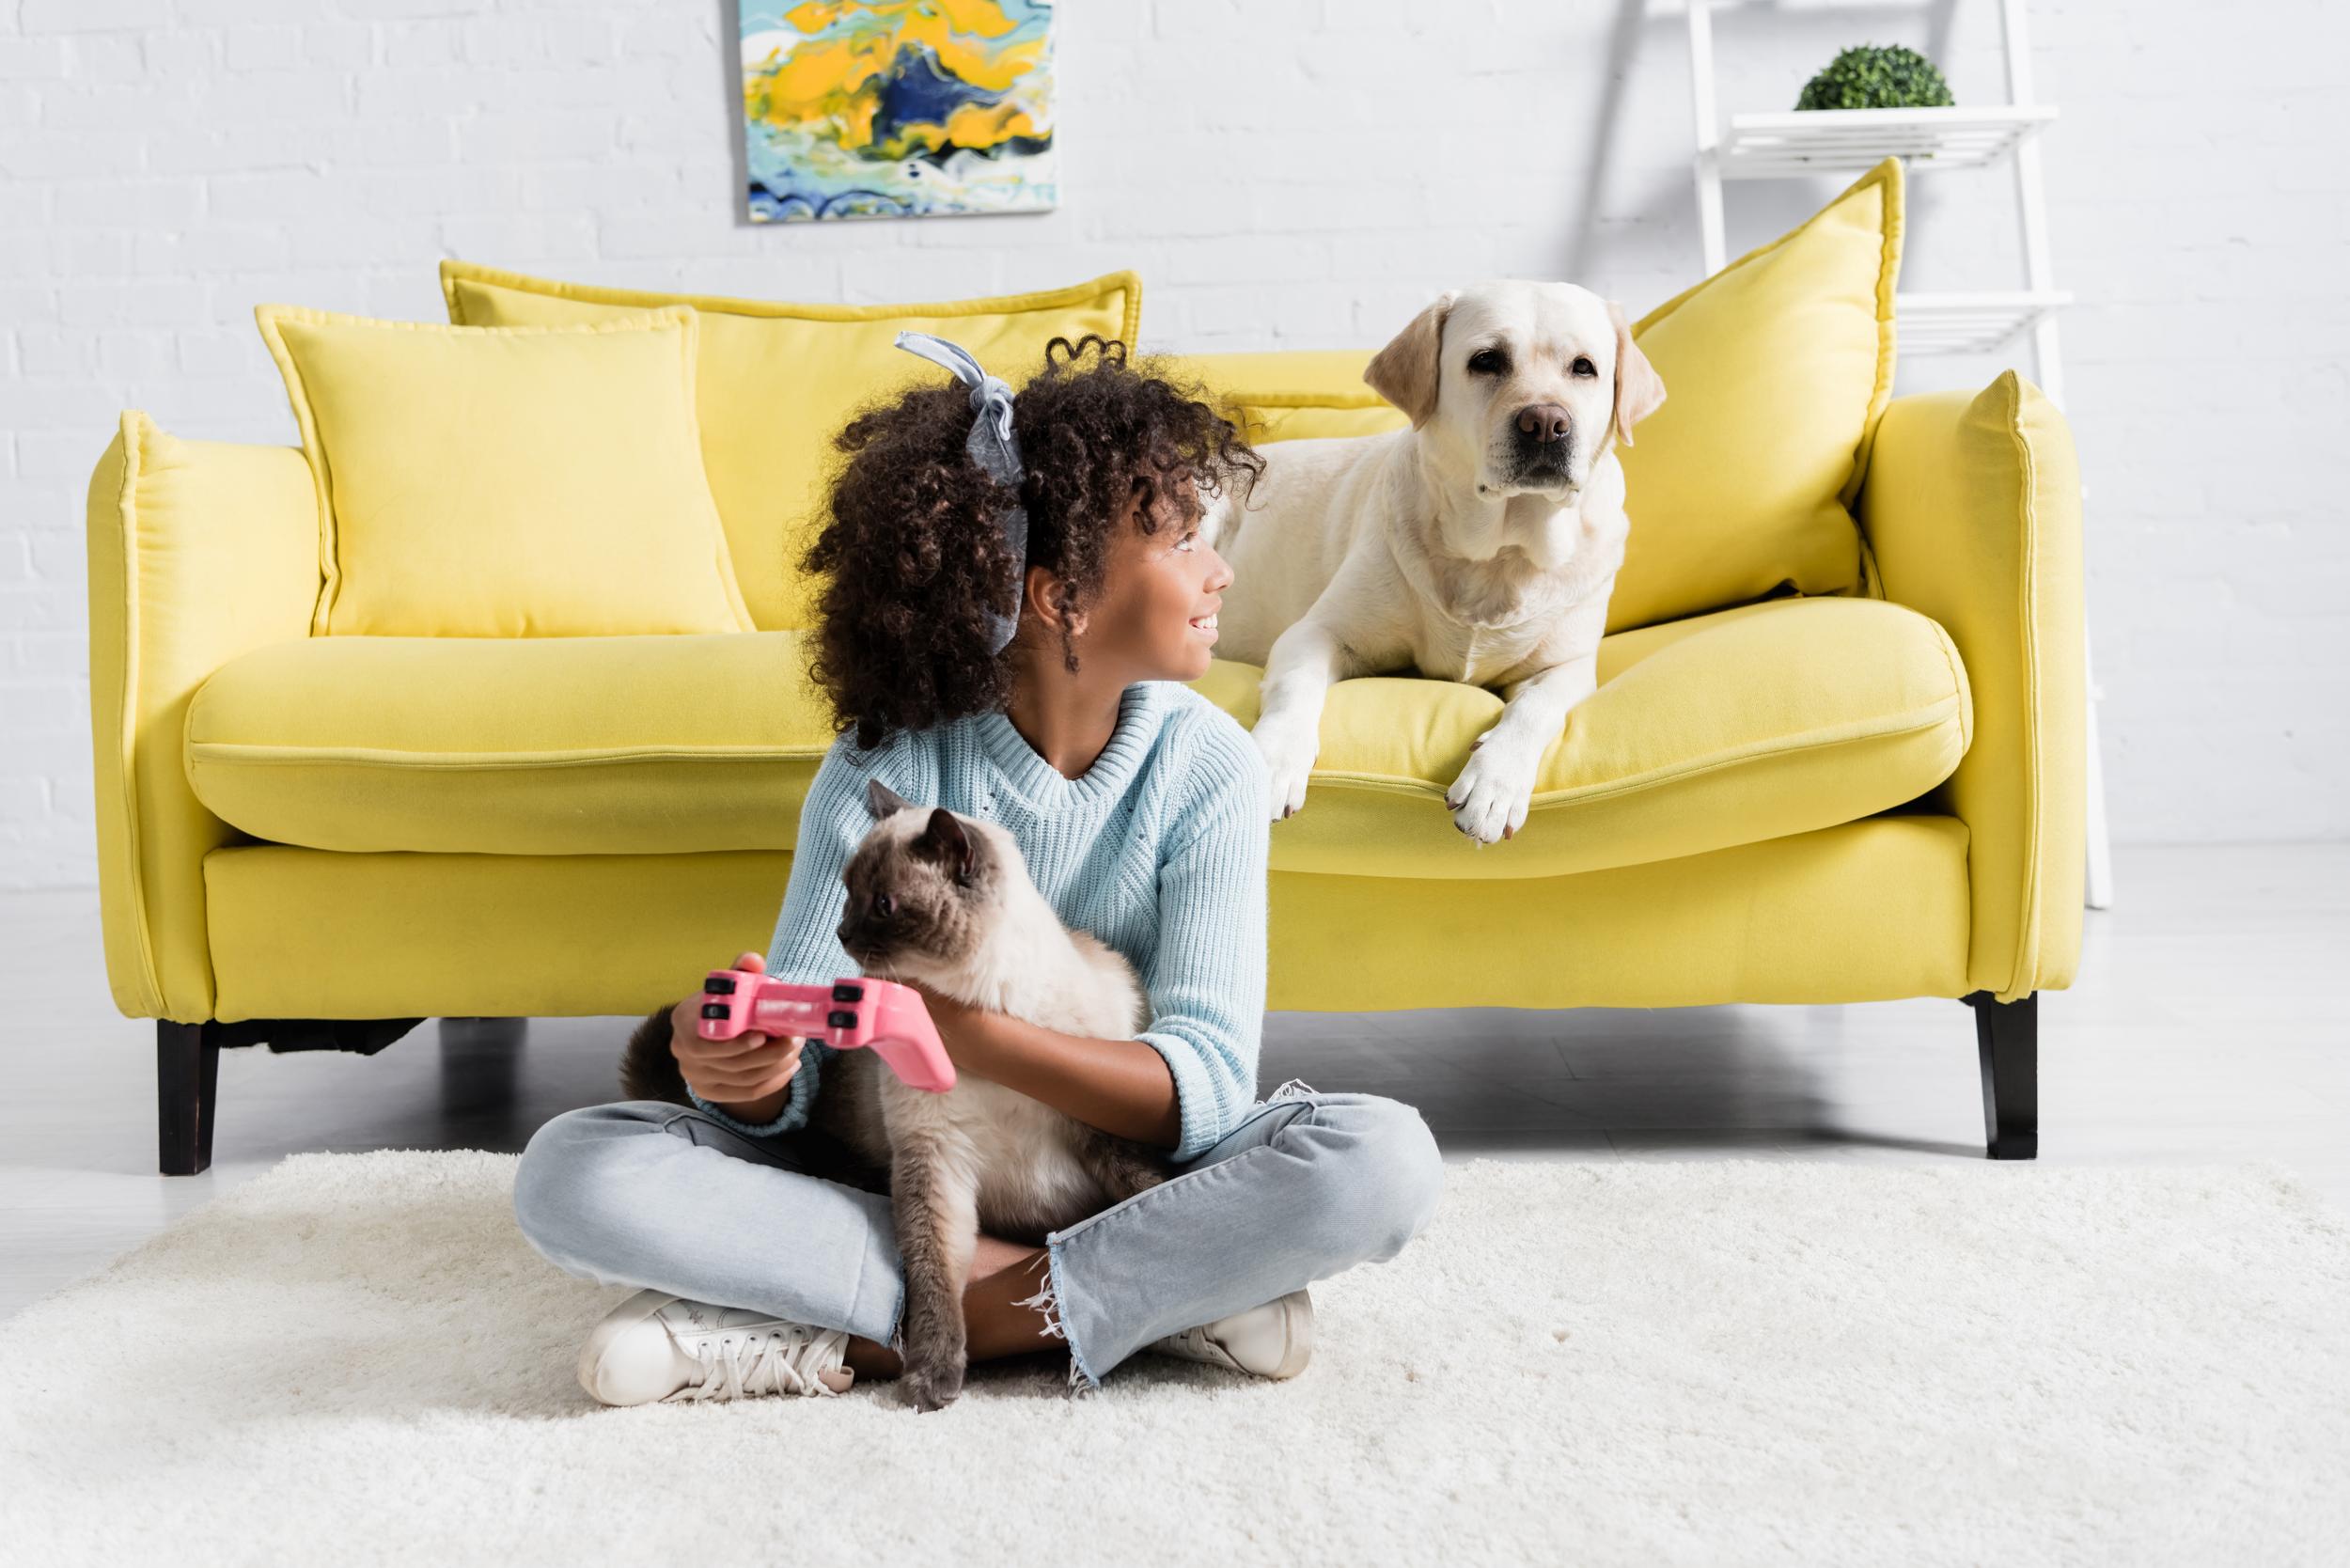 Girl with pets on yellow couch